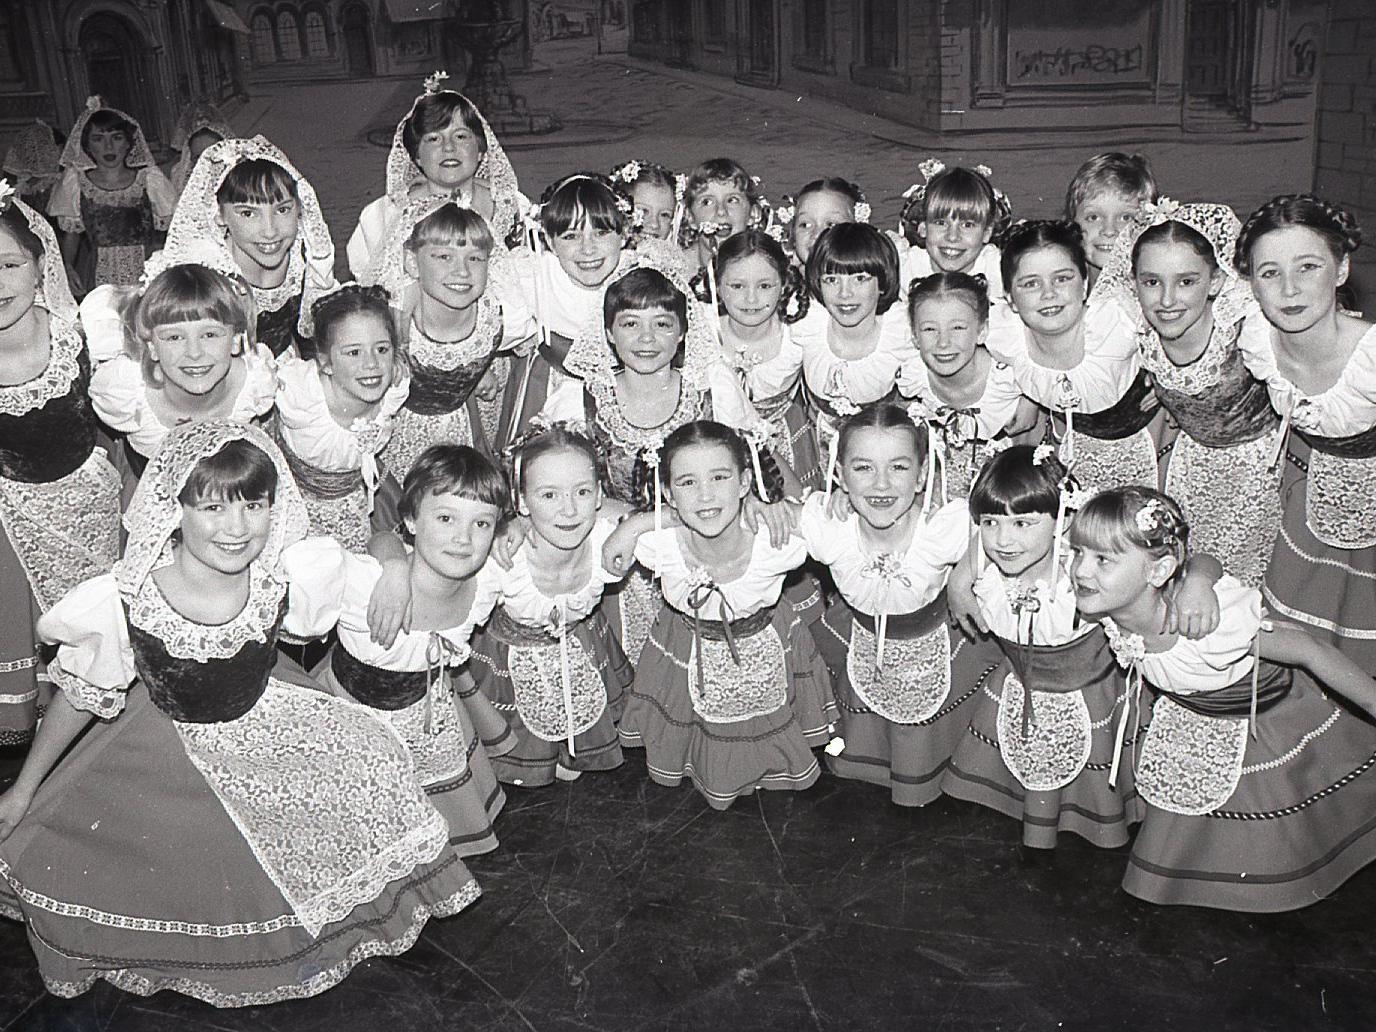 Cast members of Blackpol Children's pantomime - Pinocchio